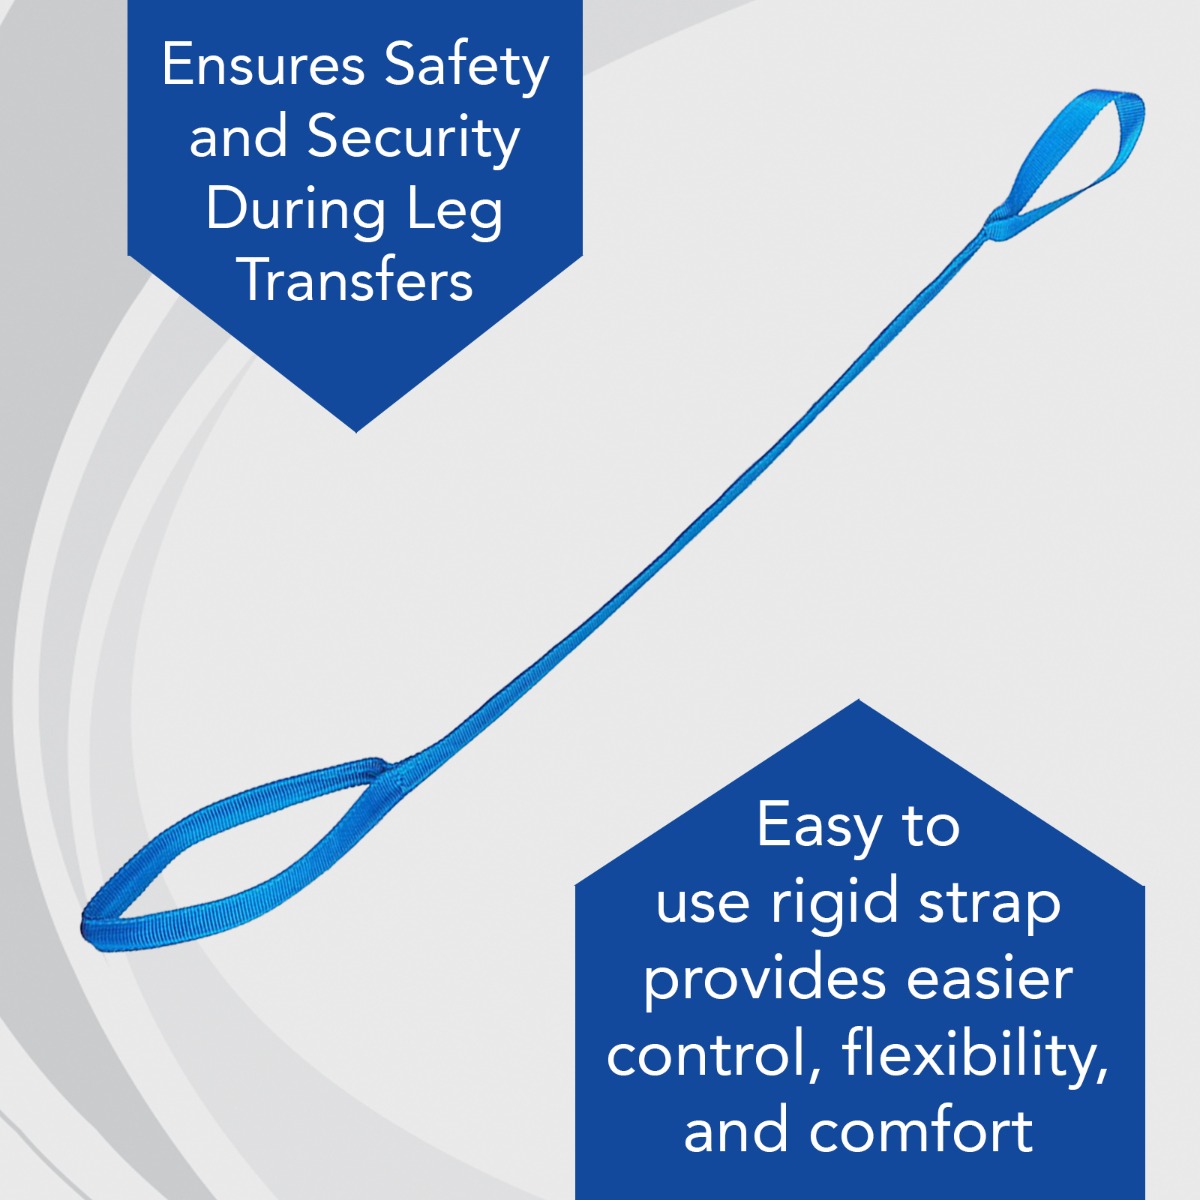 Leg lifter strap for safe and secure leg transfers
